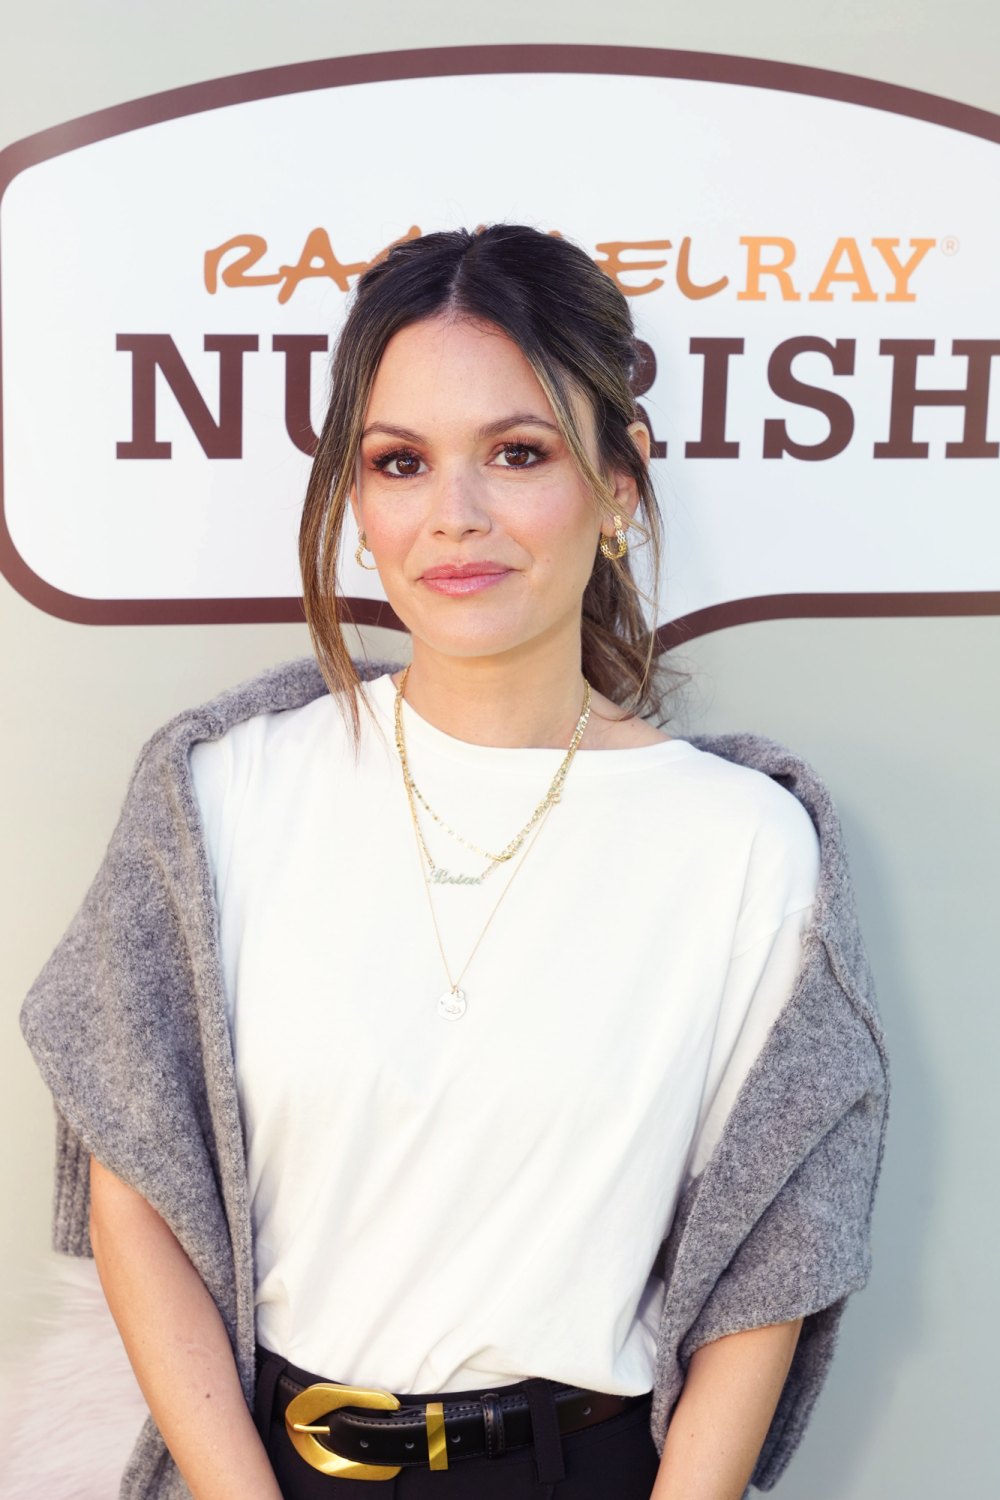 Rachel Bilson Jokes 9-Year-Old Daughter Briar Rose Told Her She Not Allowed to Have Another Baby